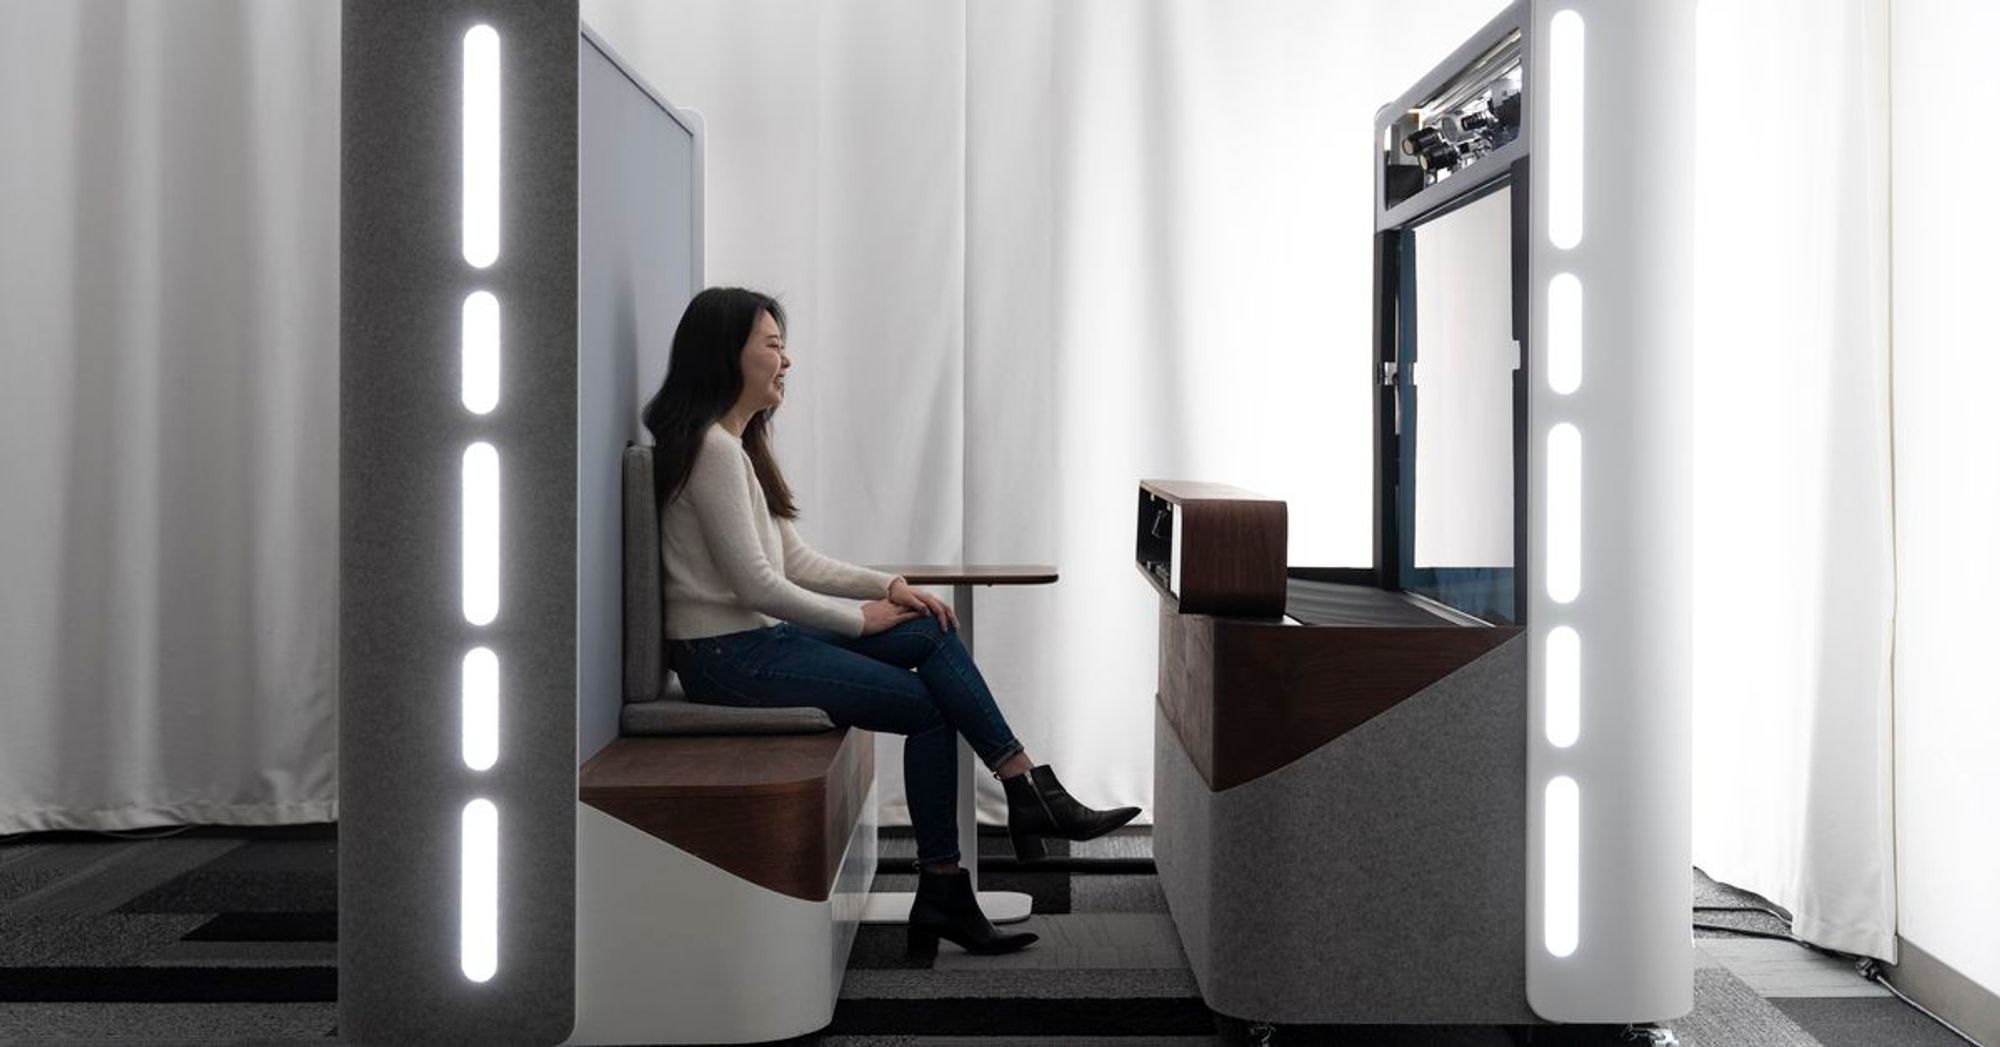 A meeting in Google's 3D chat booth felt like real life science fiction